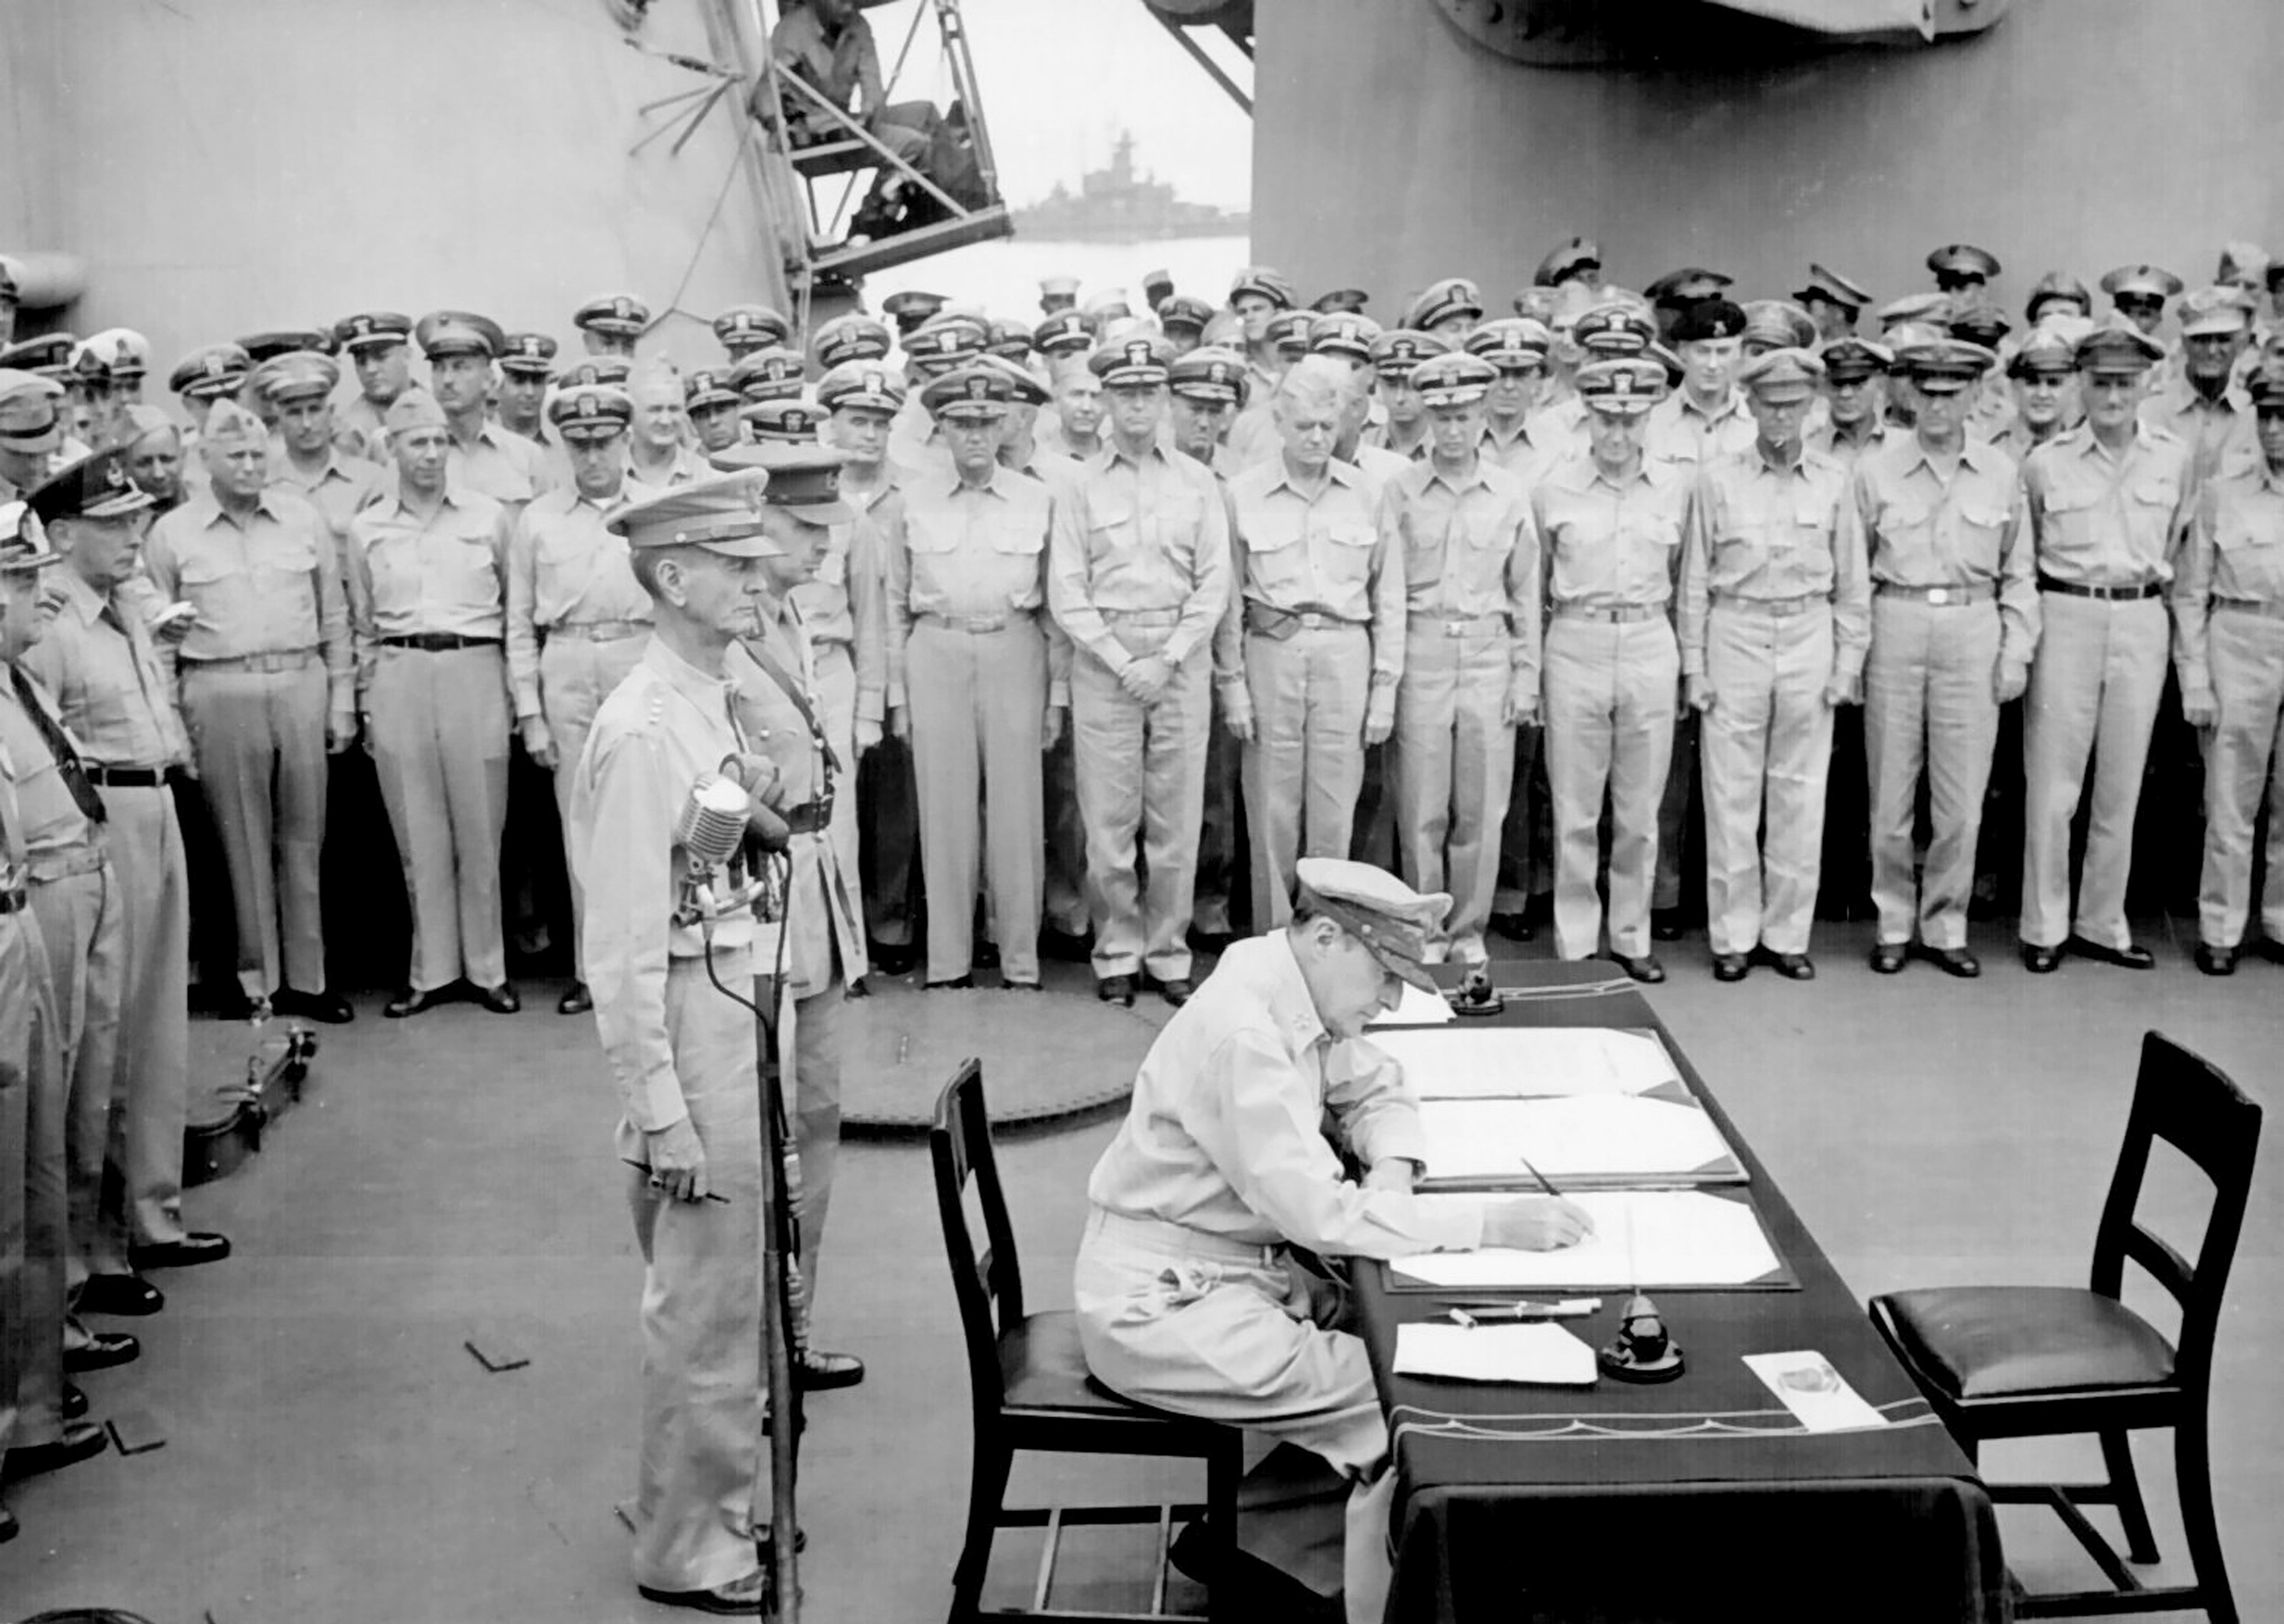 On this day in history, Sept. 2, 1945, World War II ends as Japan formally surrenders to US, Allies